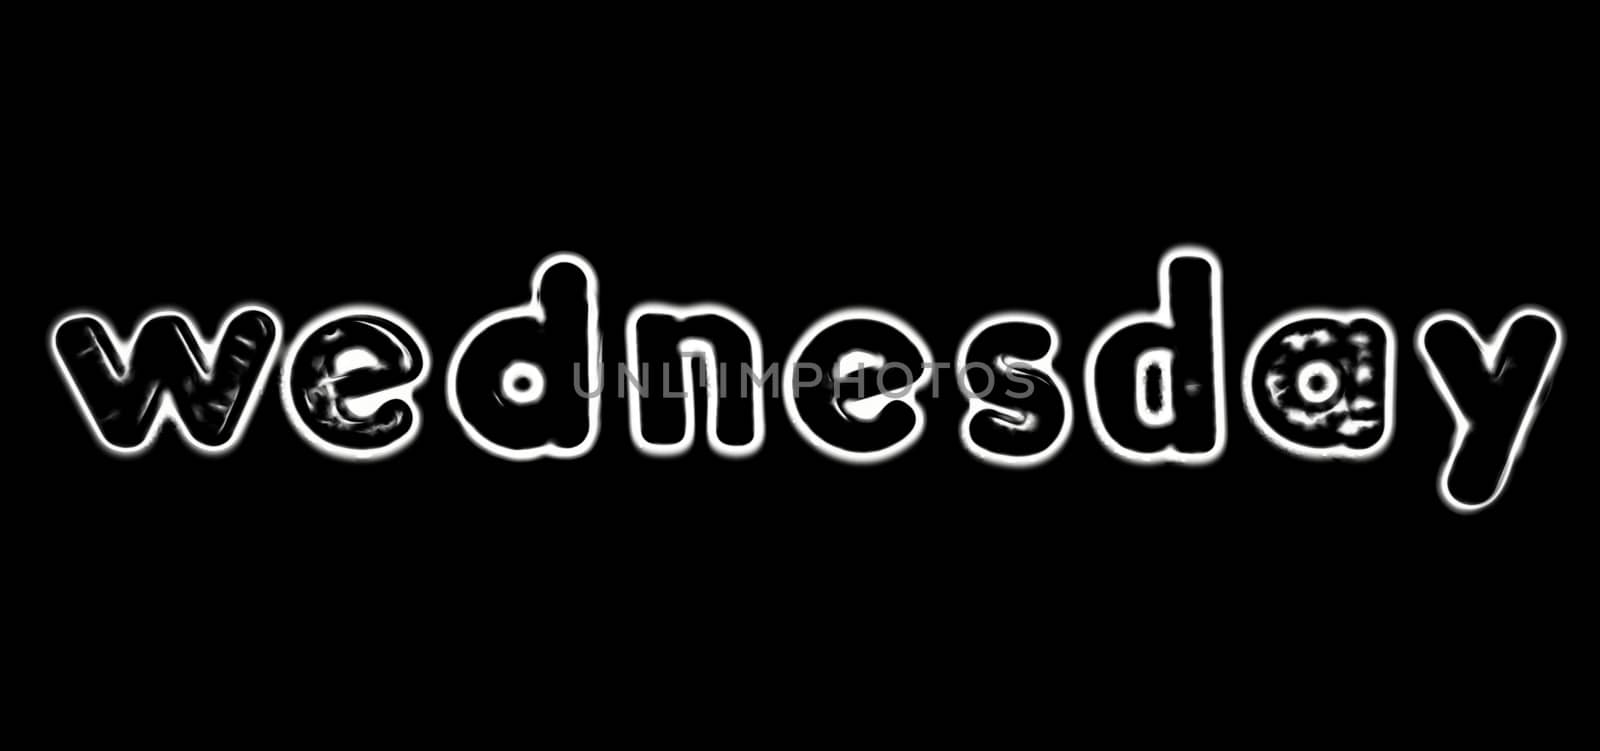 Plastic letters with the word Wednesday converted to black and white illustration